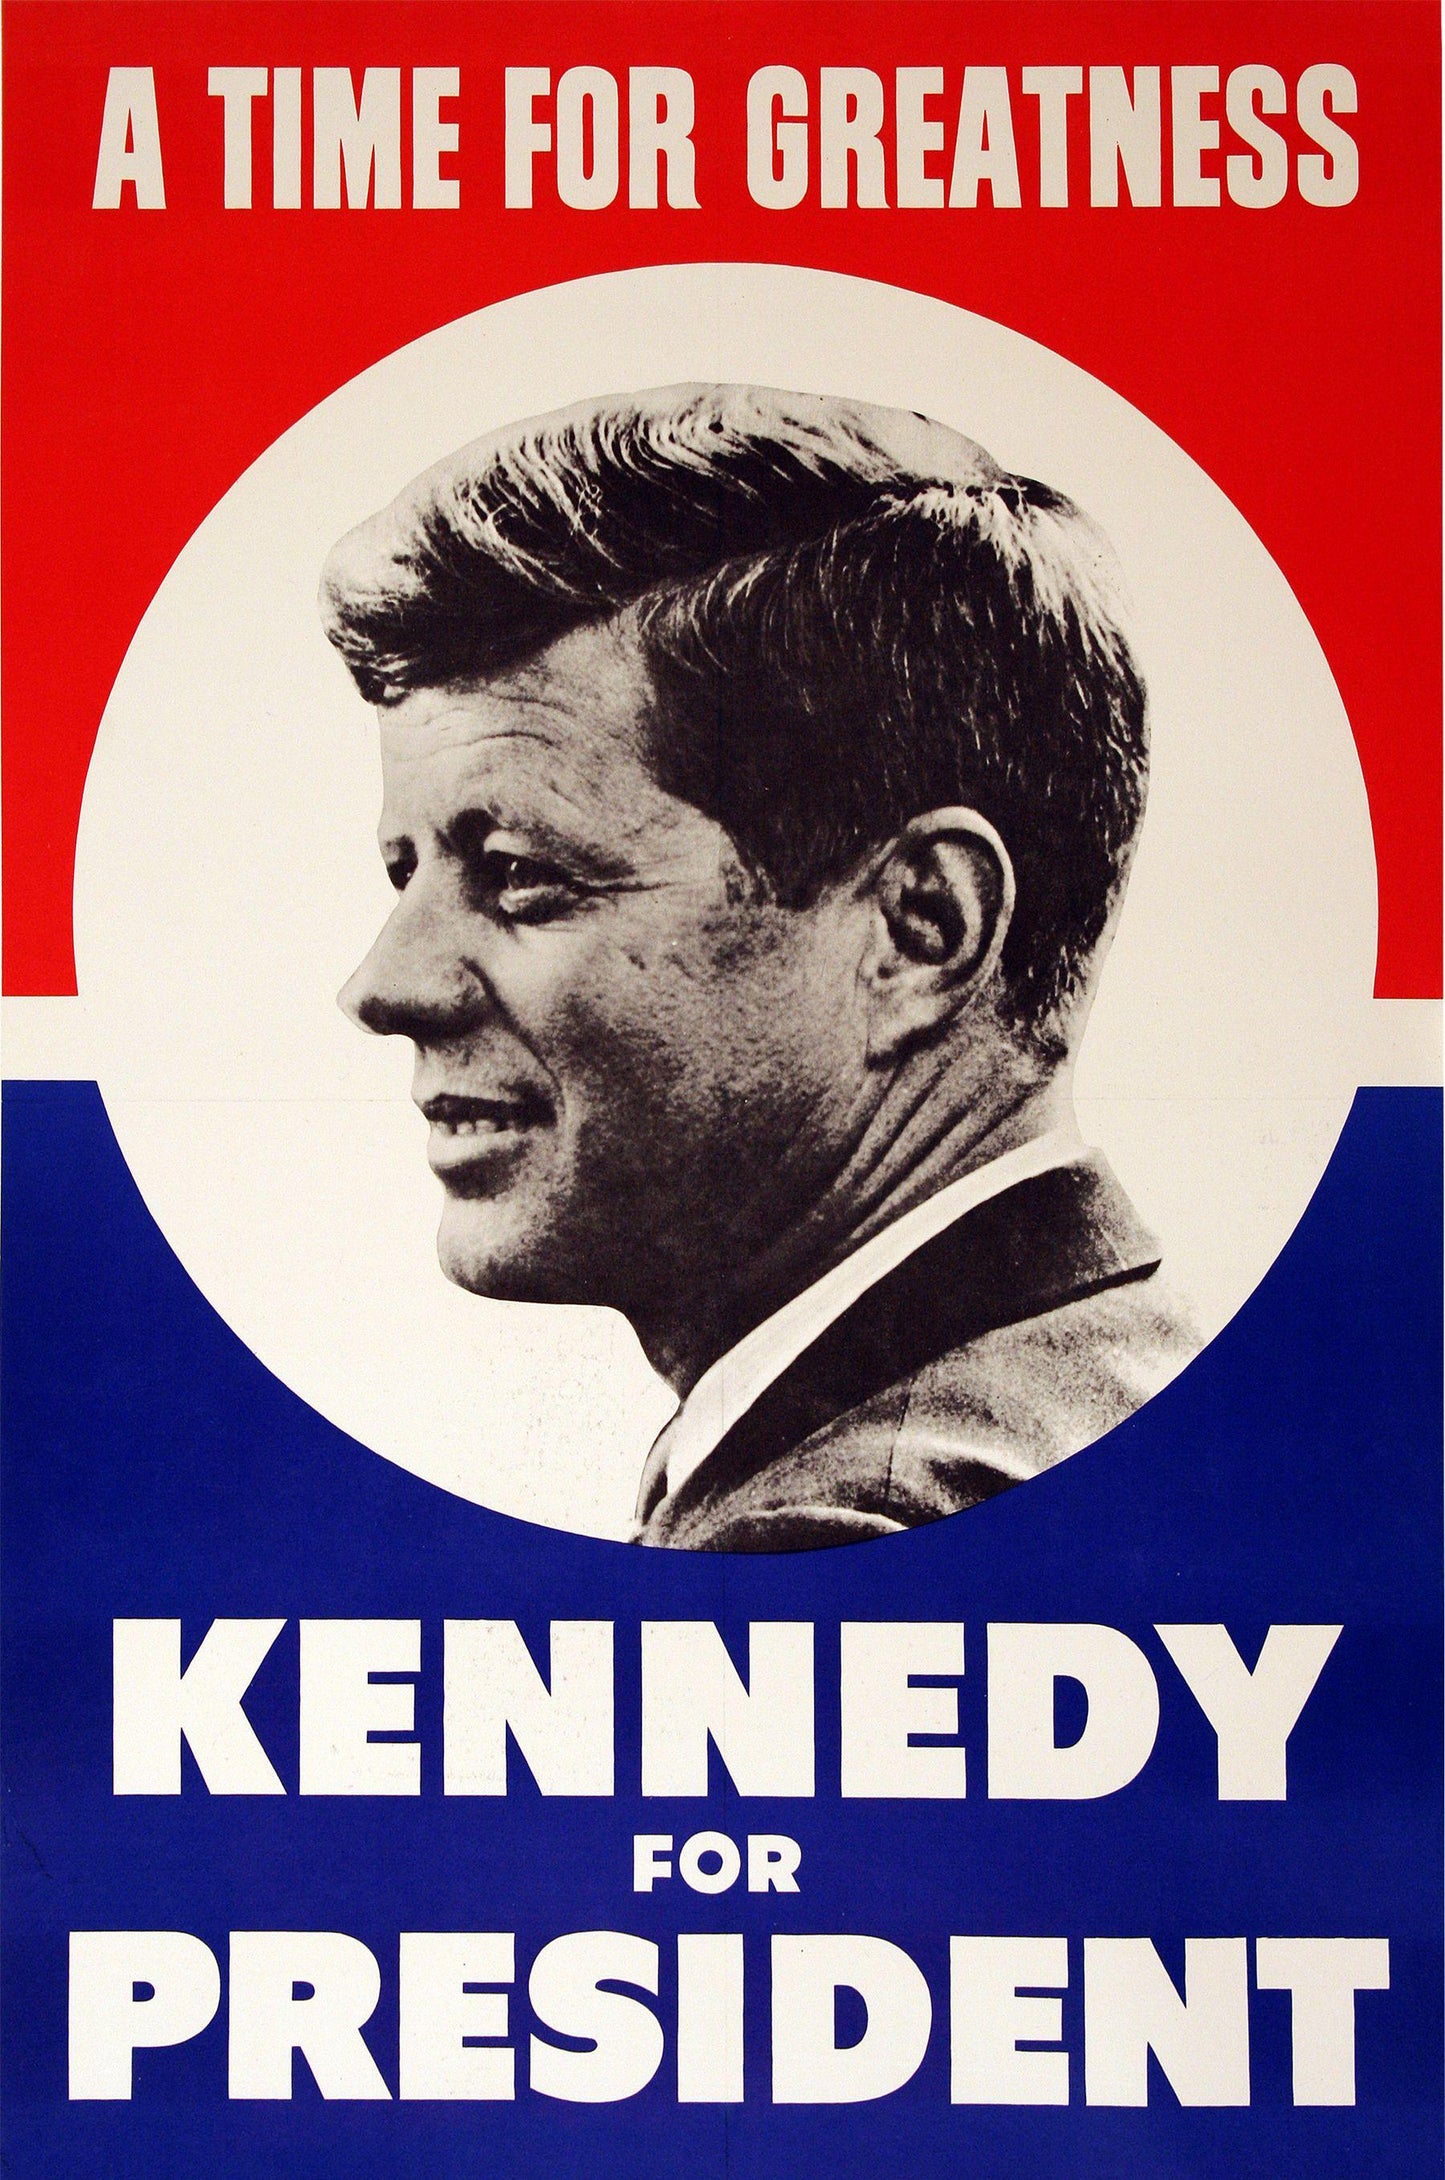 Original JFK Kennedy for President - A Time of Greatness 1960 Rare Poster